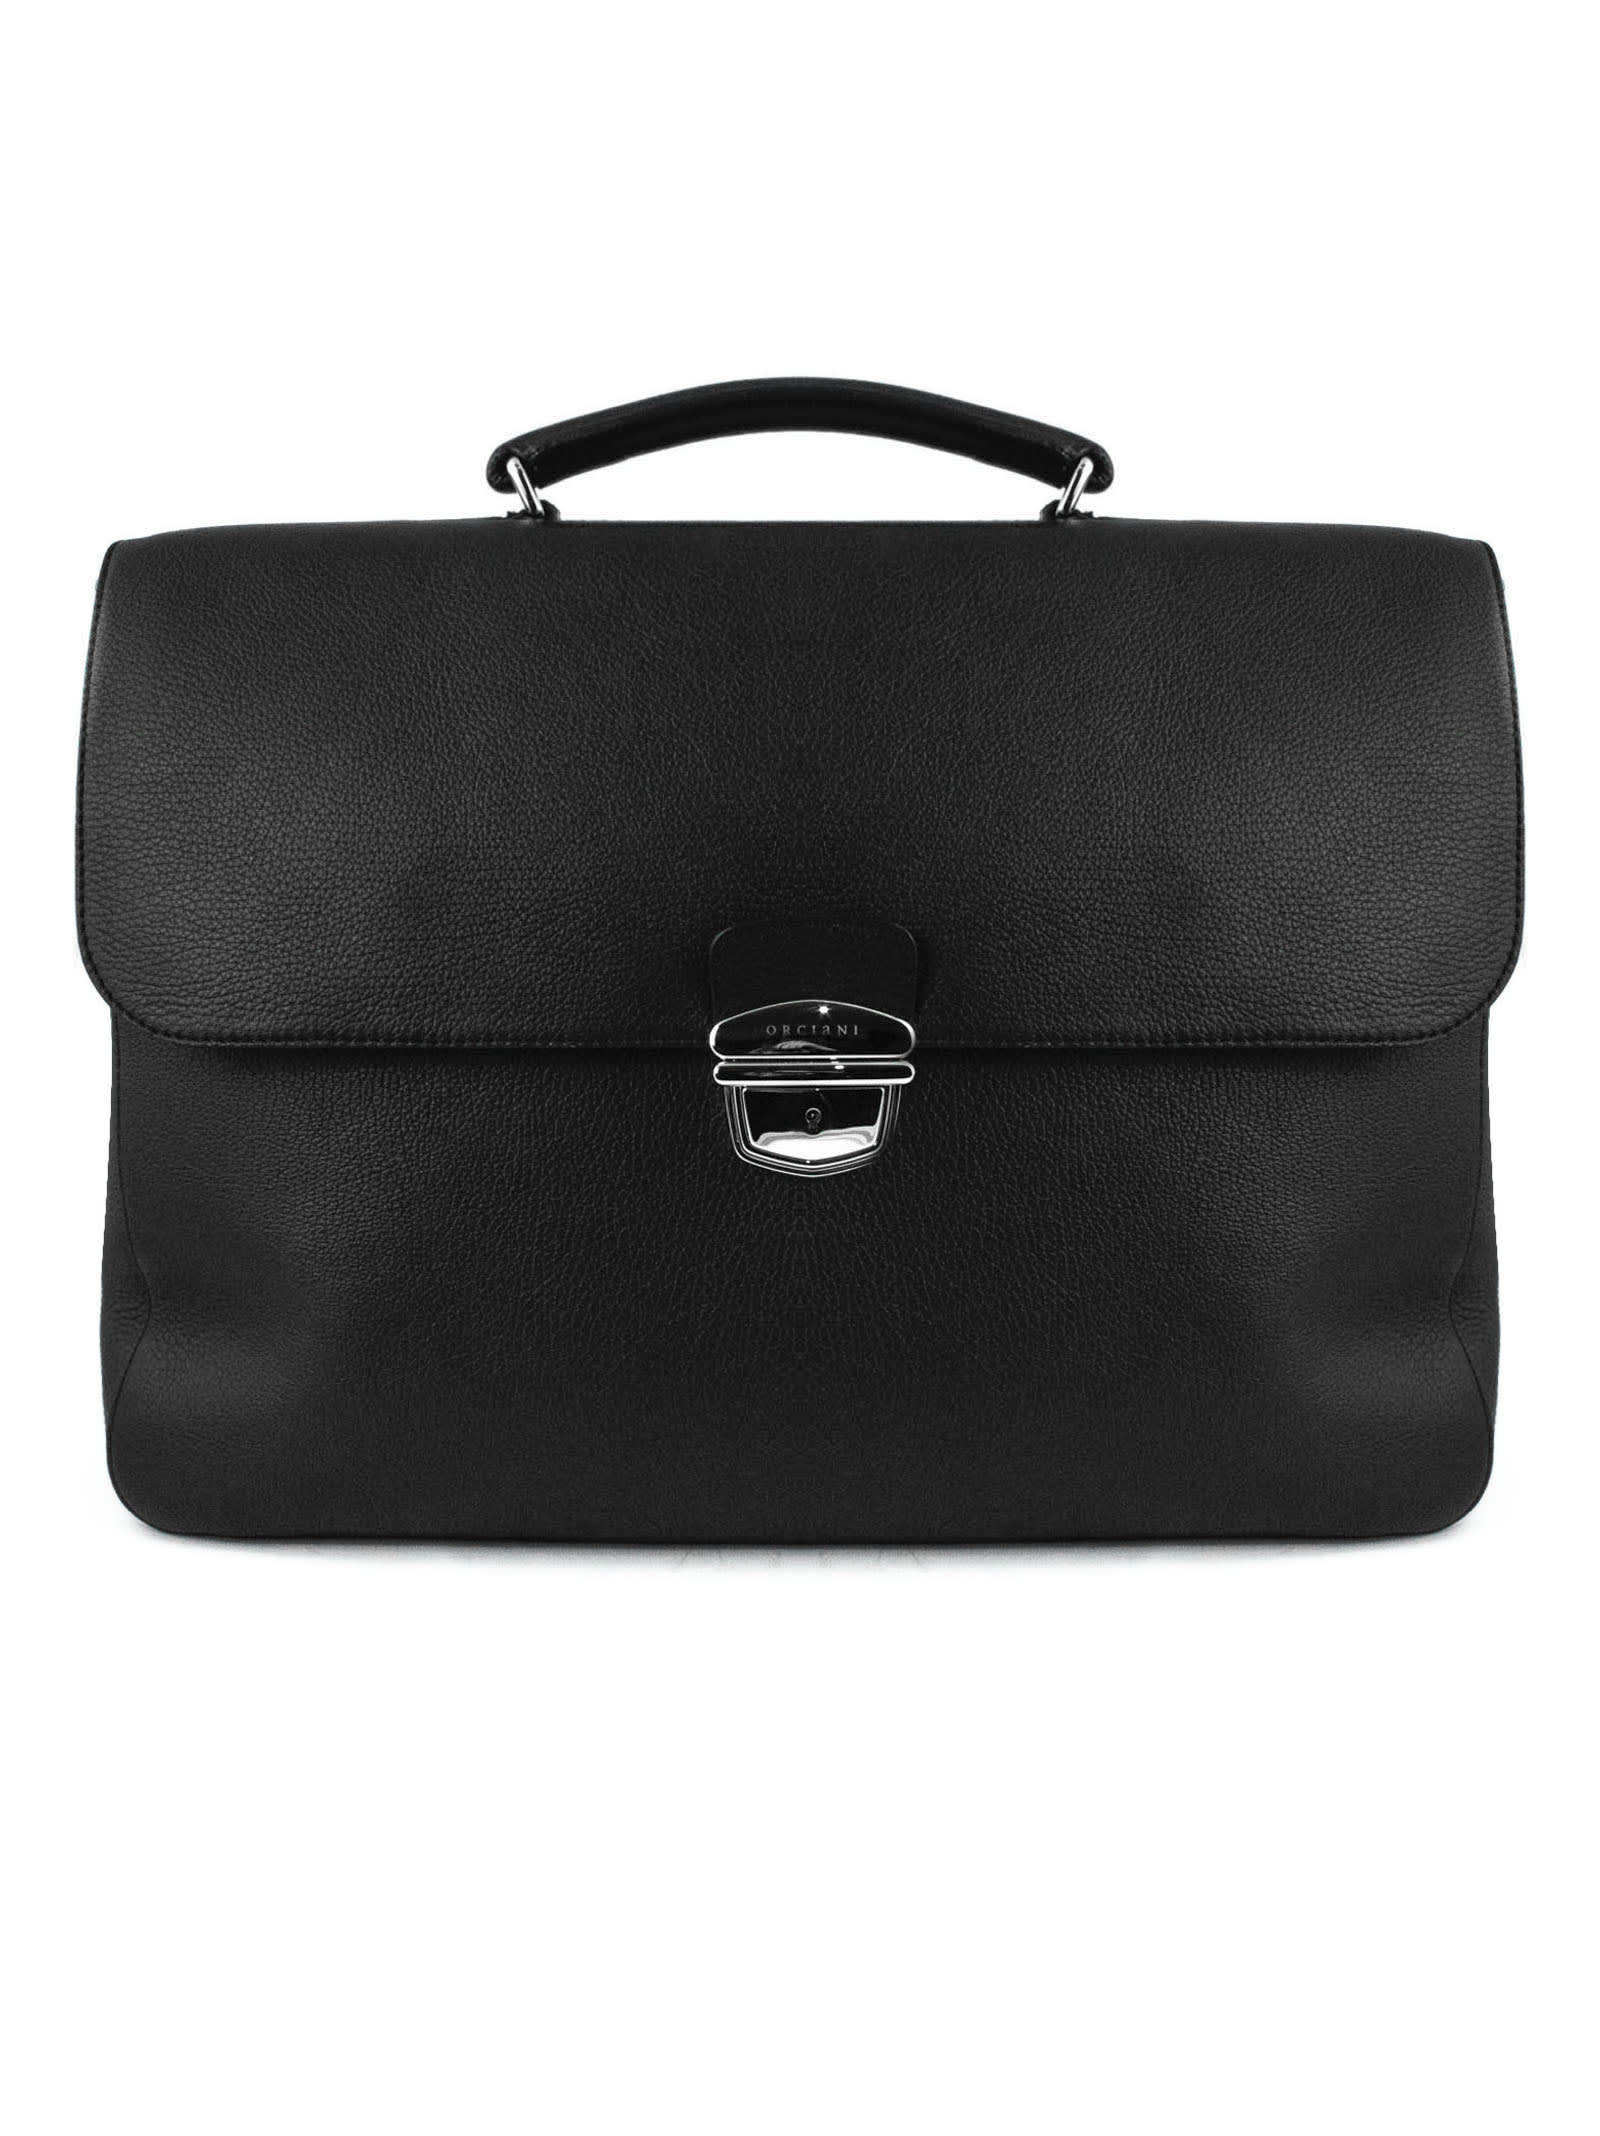 ORCIANI BLACK LEATHER LARGE BRIEFCASE,11797451